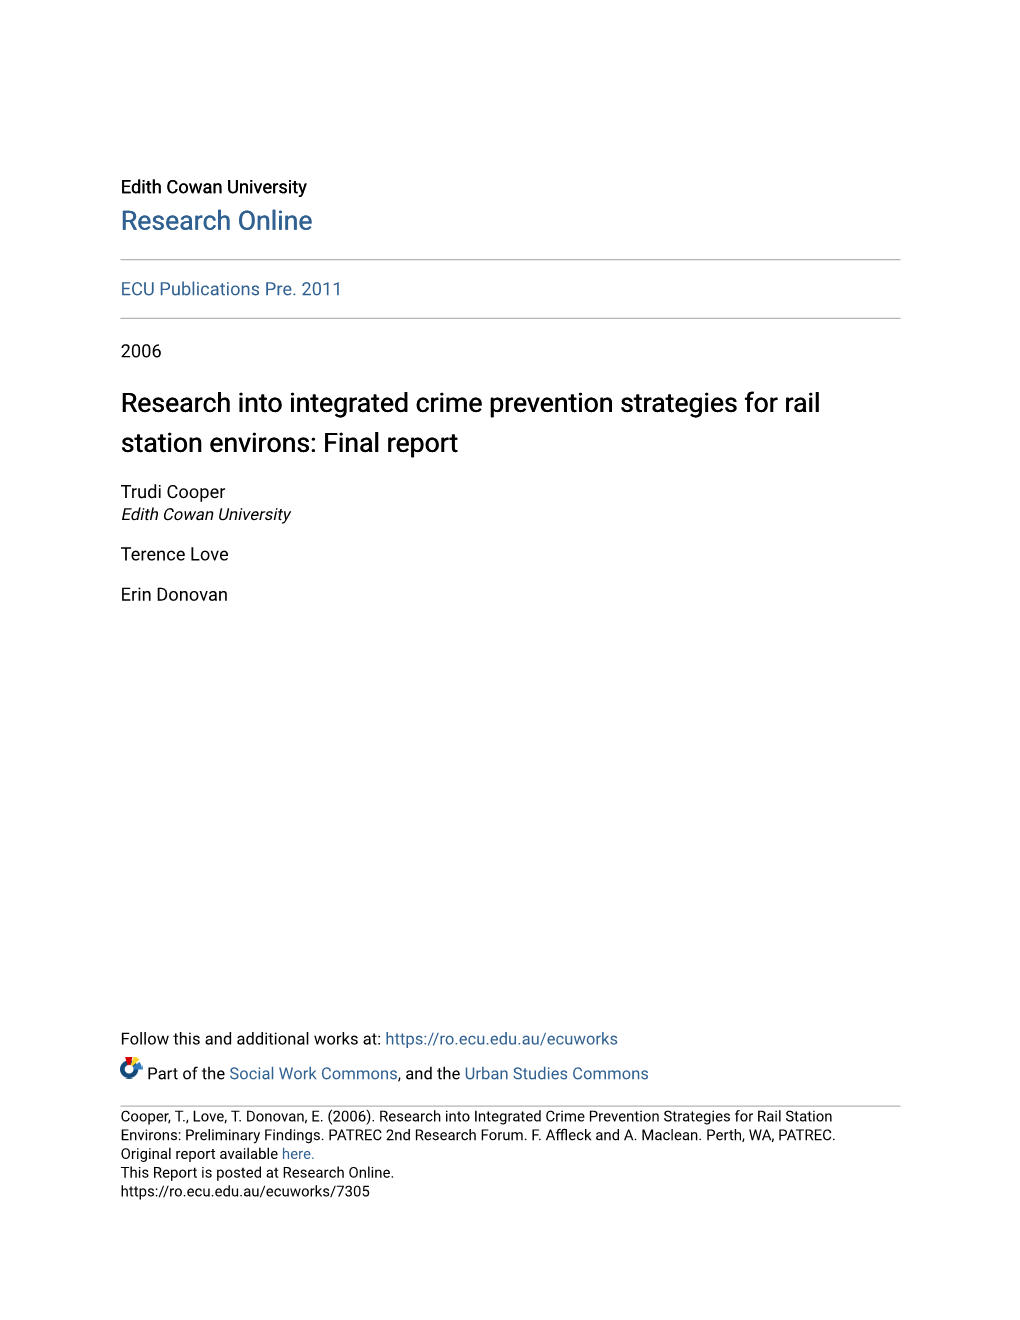 Research Into Integrated Crime Prevention Strategies for Rail Station Environs: Final Report